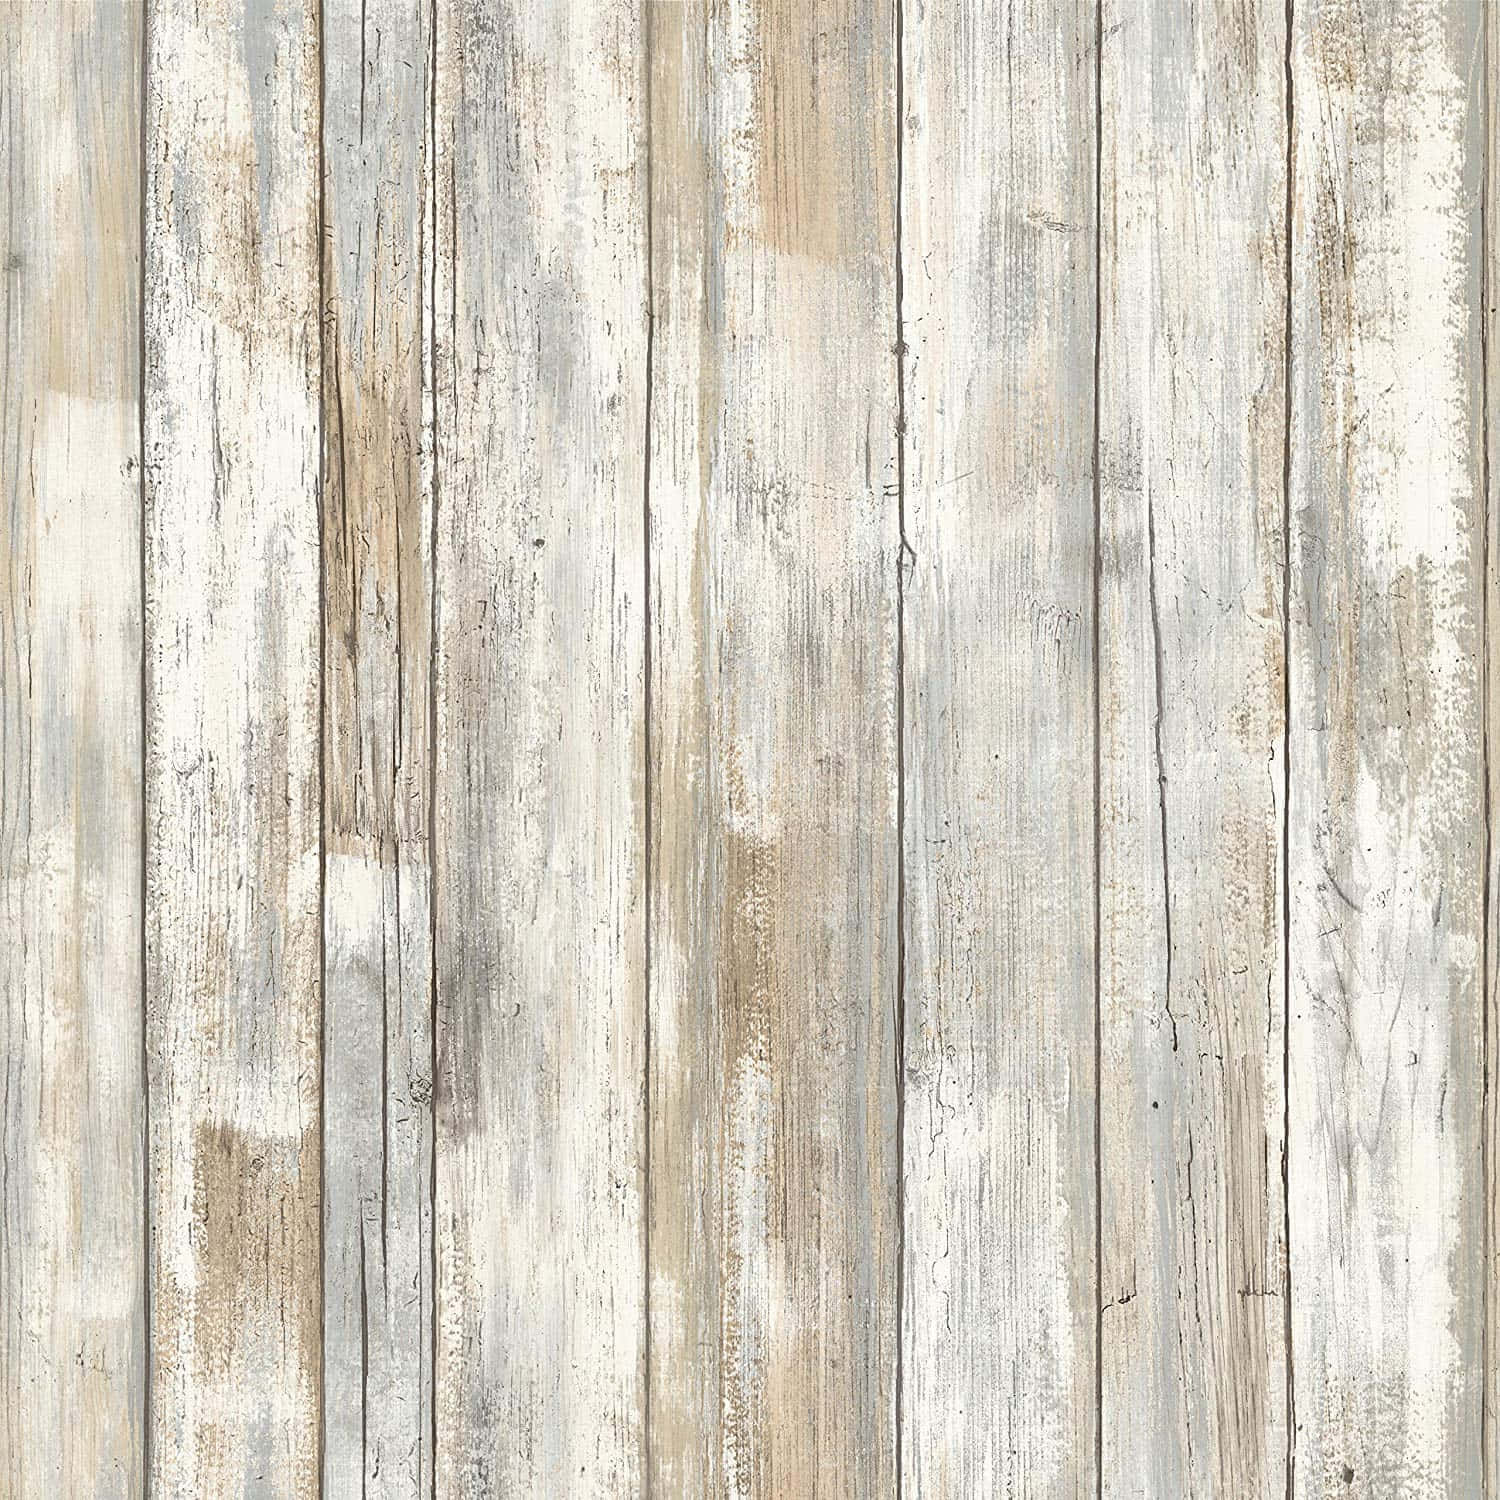 Grey Wood - A Unique Pattern to Enhance Your Space